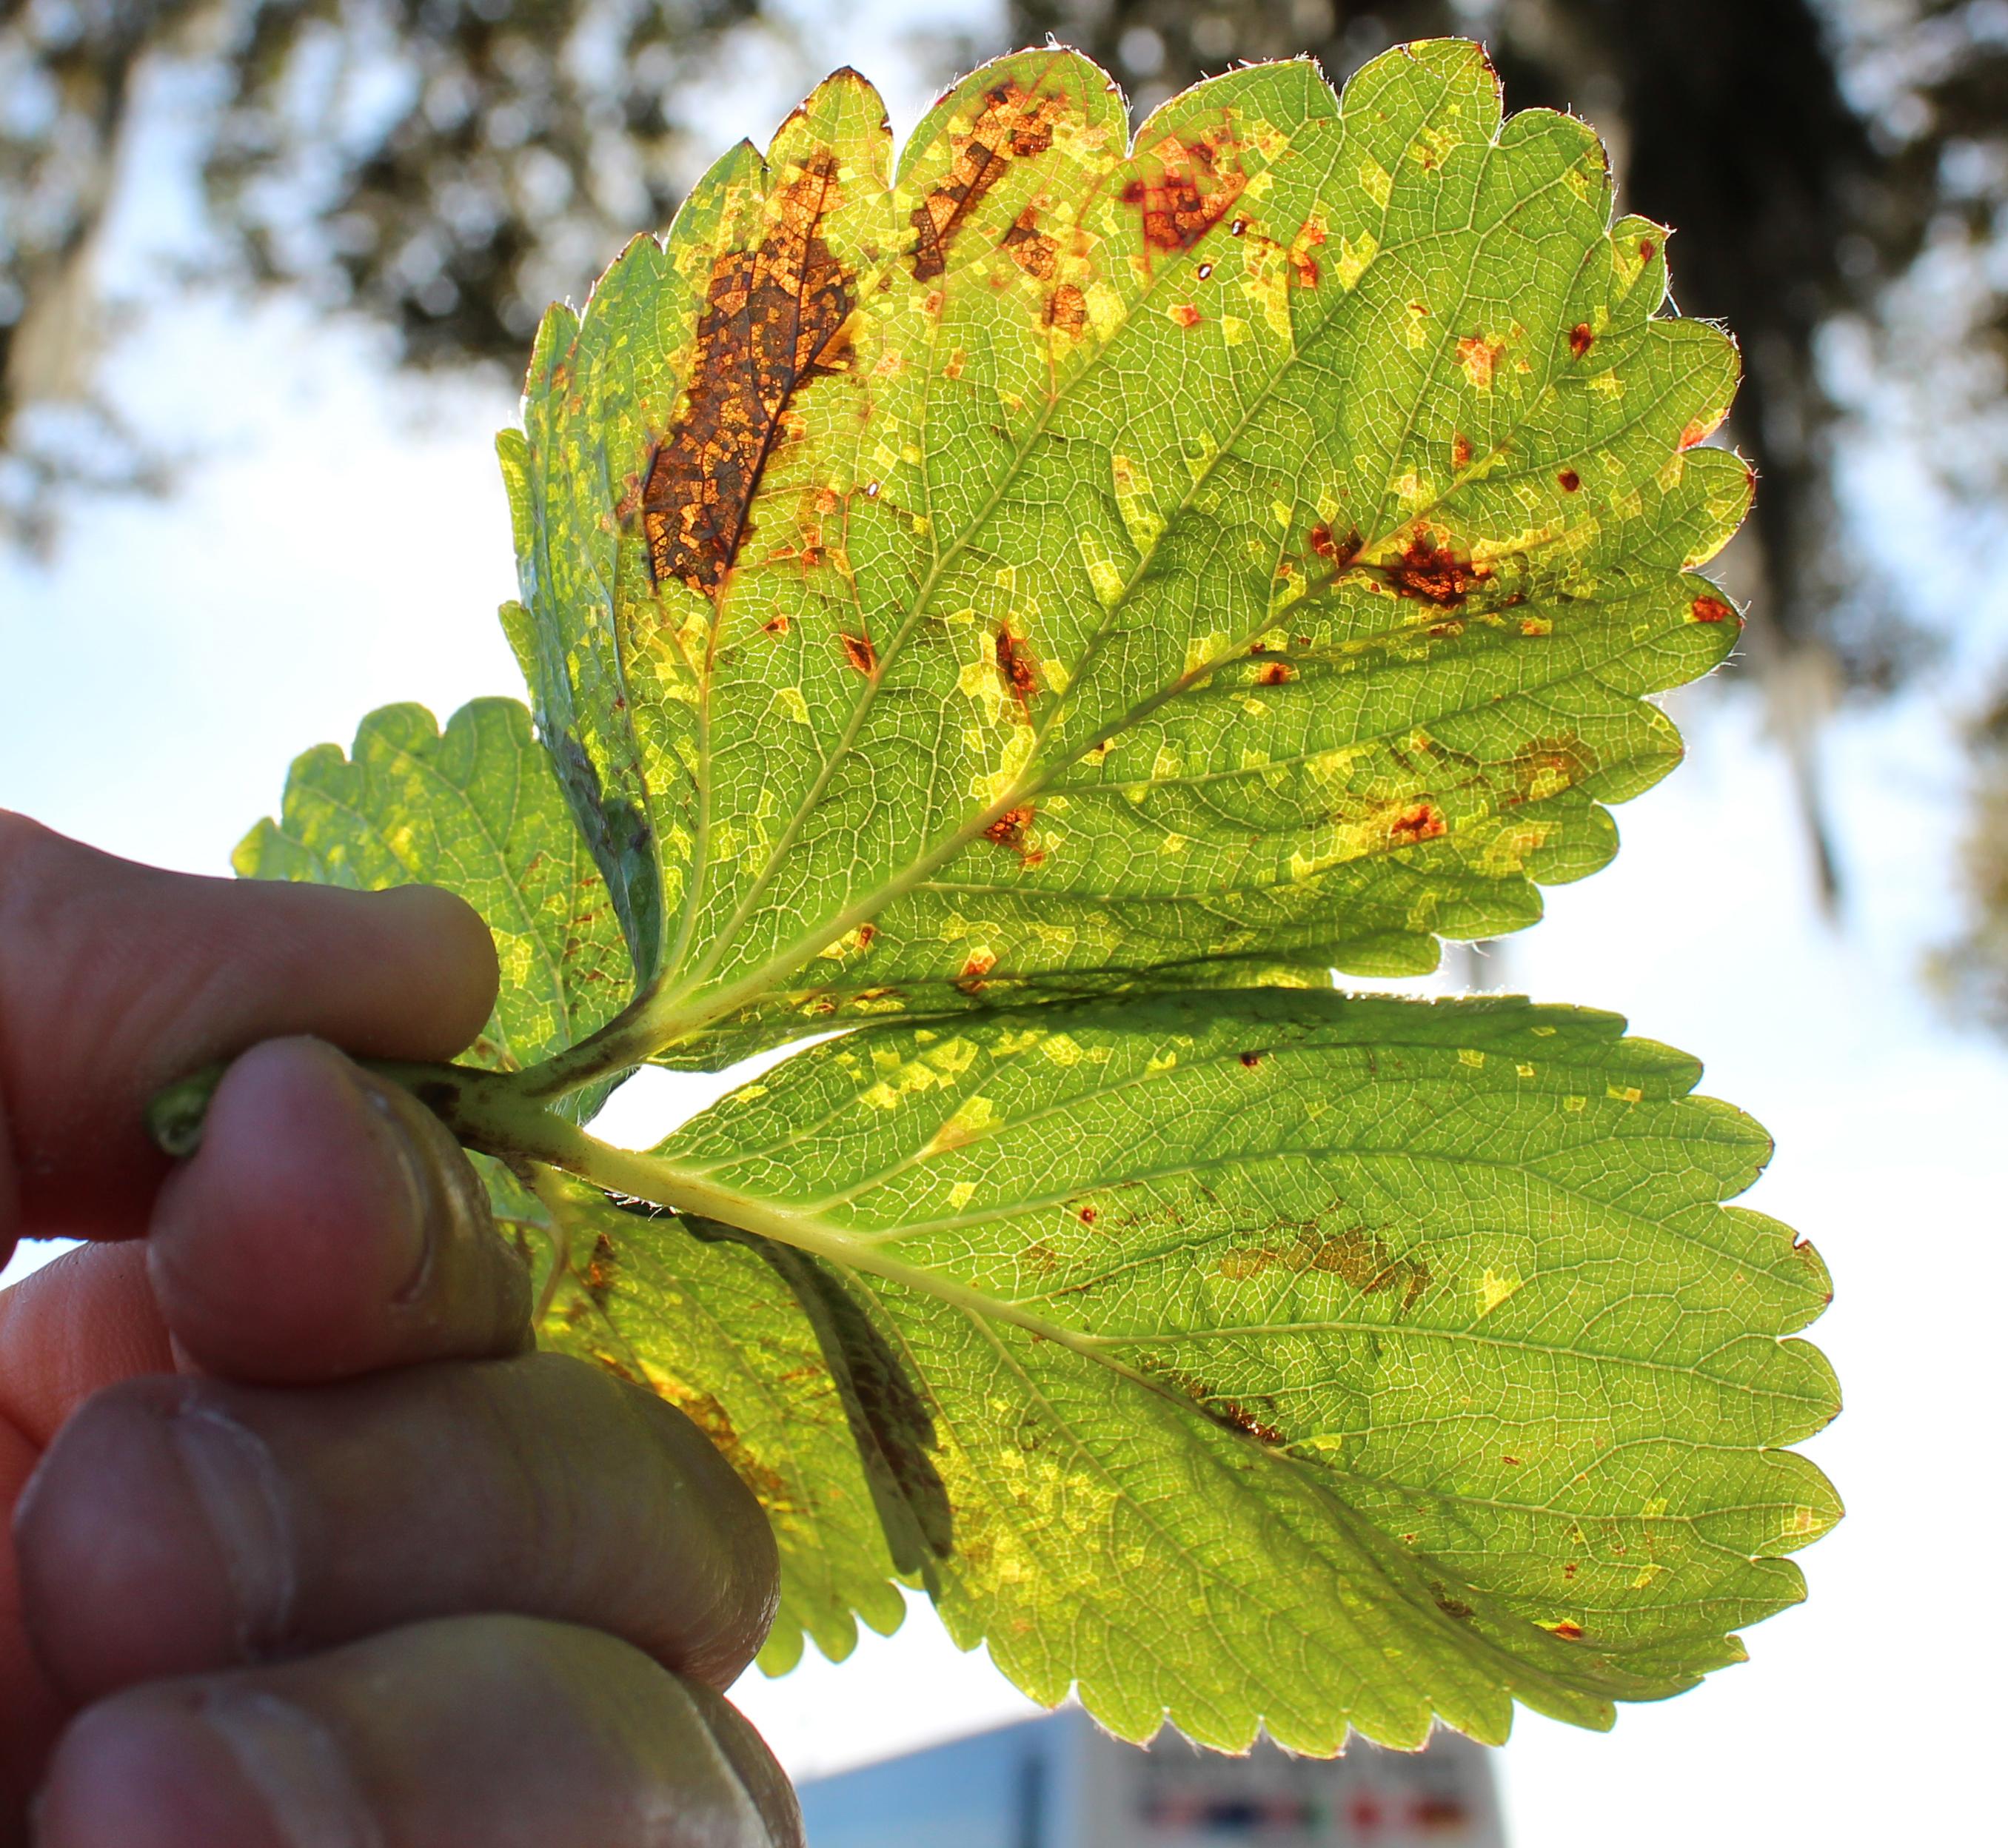 Angular leaf spot lesions initially appear translucent (Gauthier, UKY)